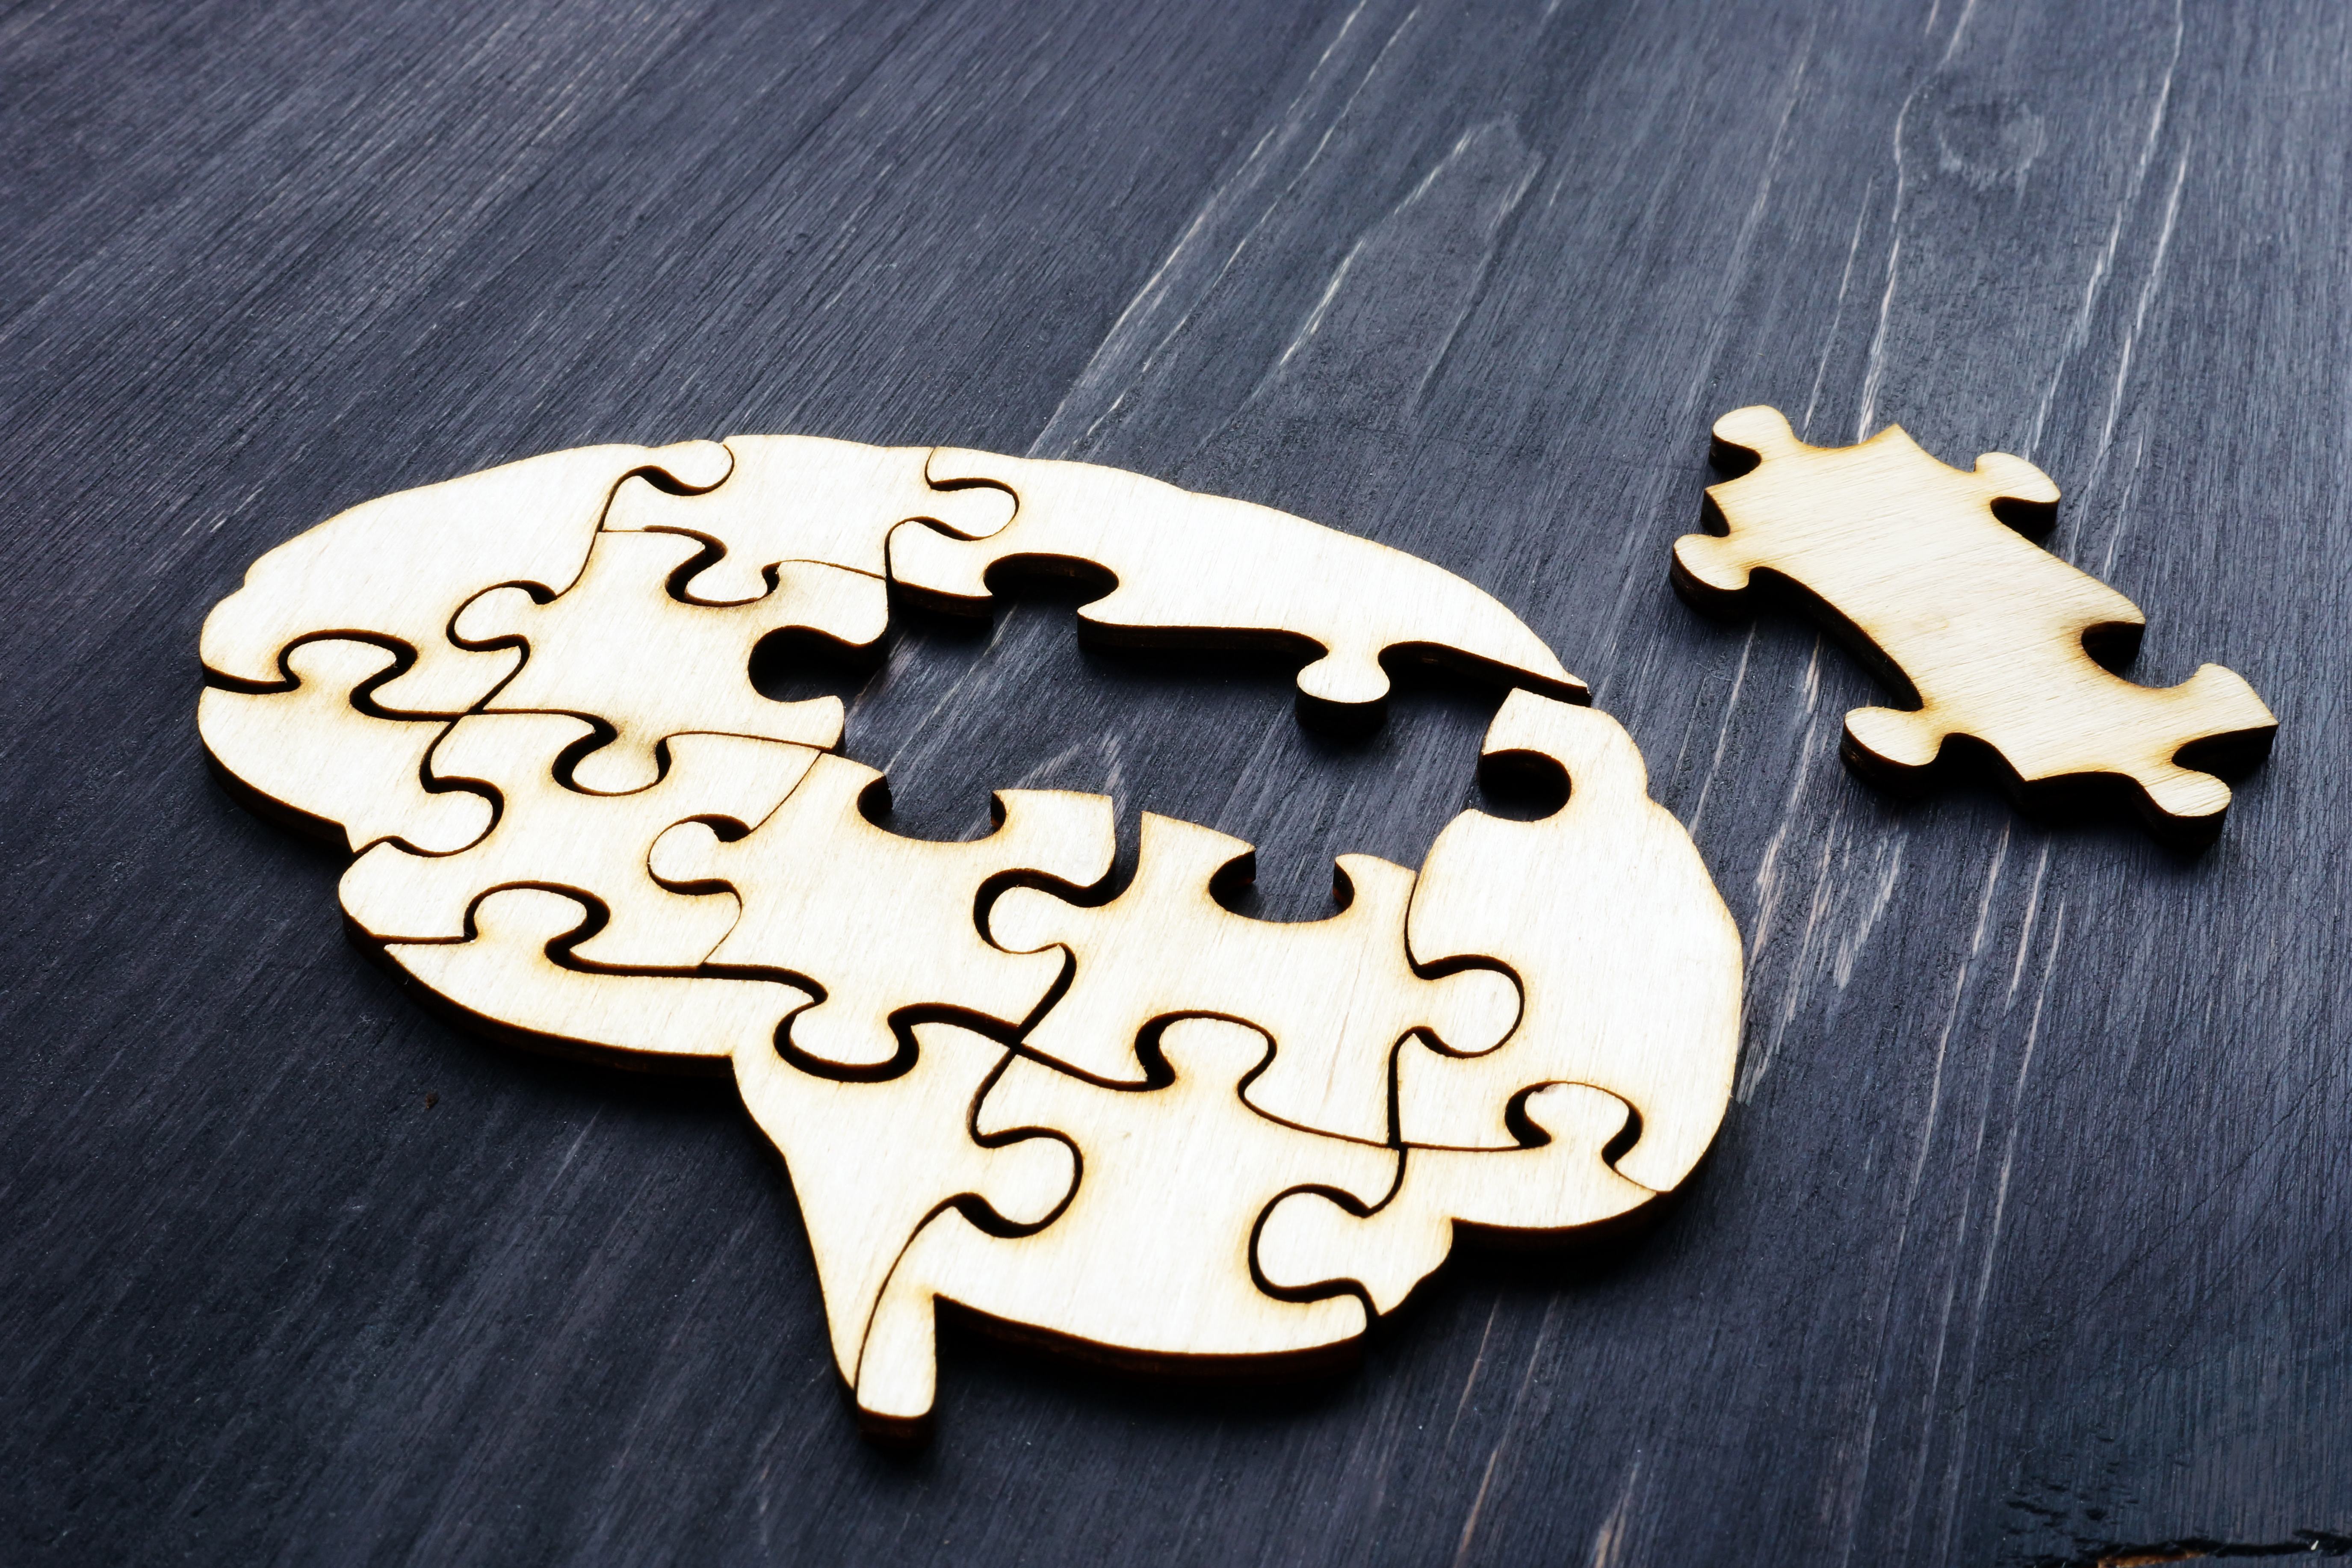 Wooden puzzle on the floor in the shape of a brain, with one piece removed waiting to be added. 